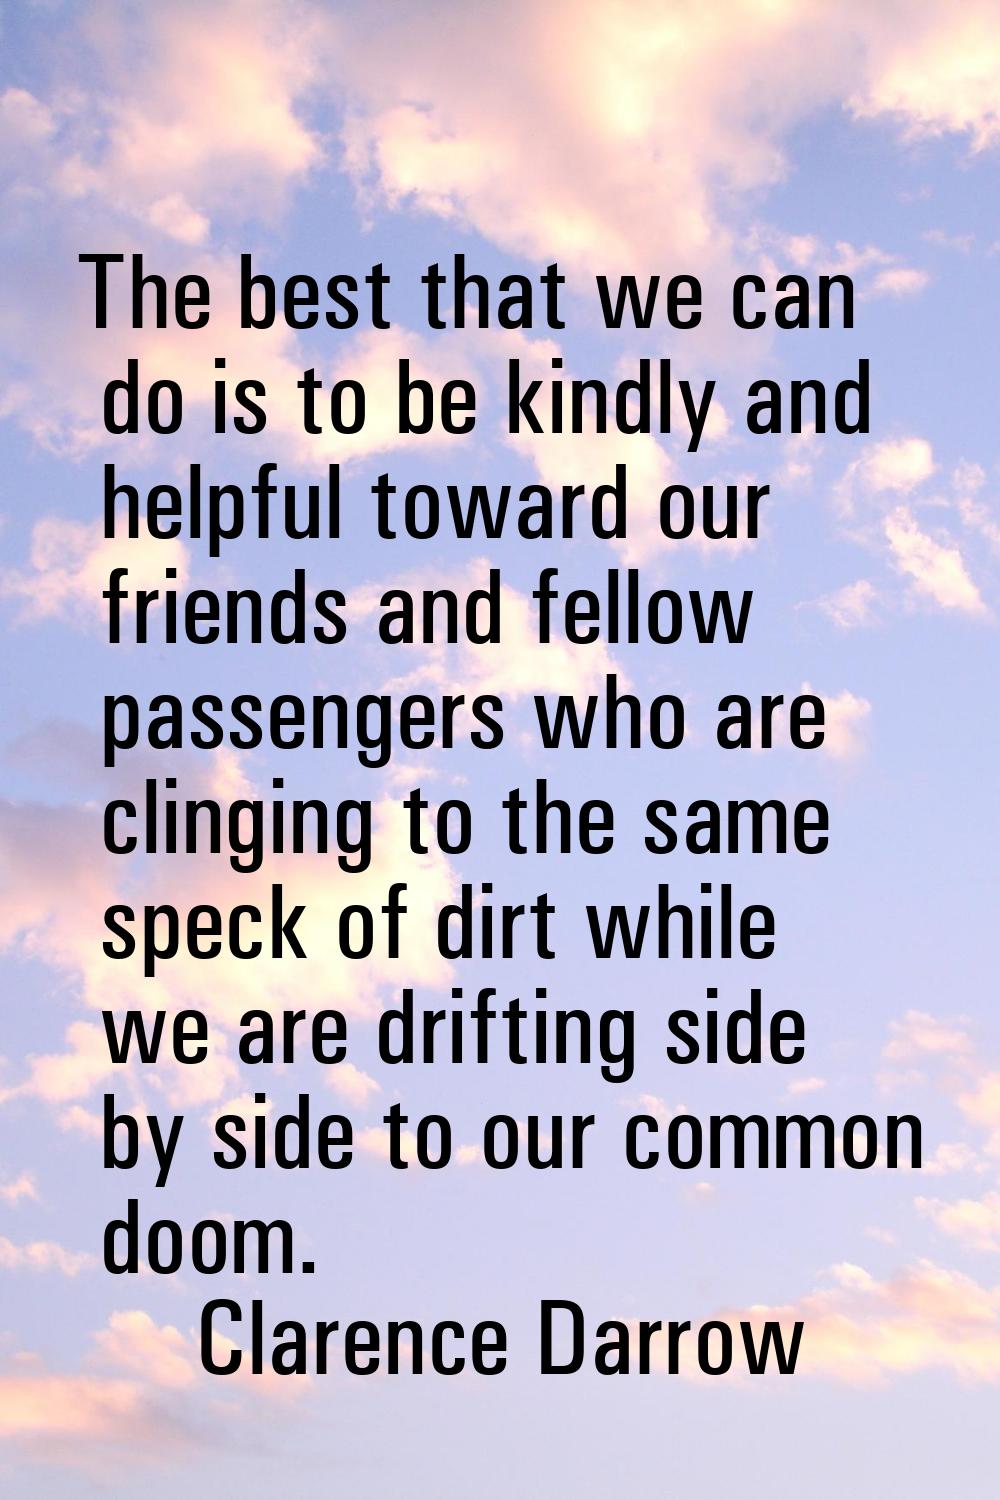 The best that we can do is to be kindly and helpful toward our friends and fellow passengers who ar